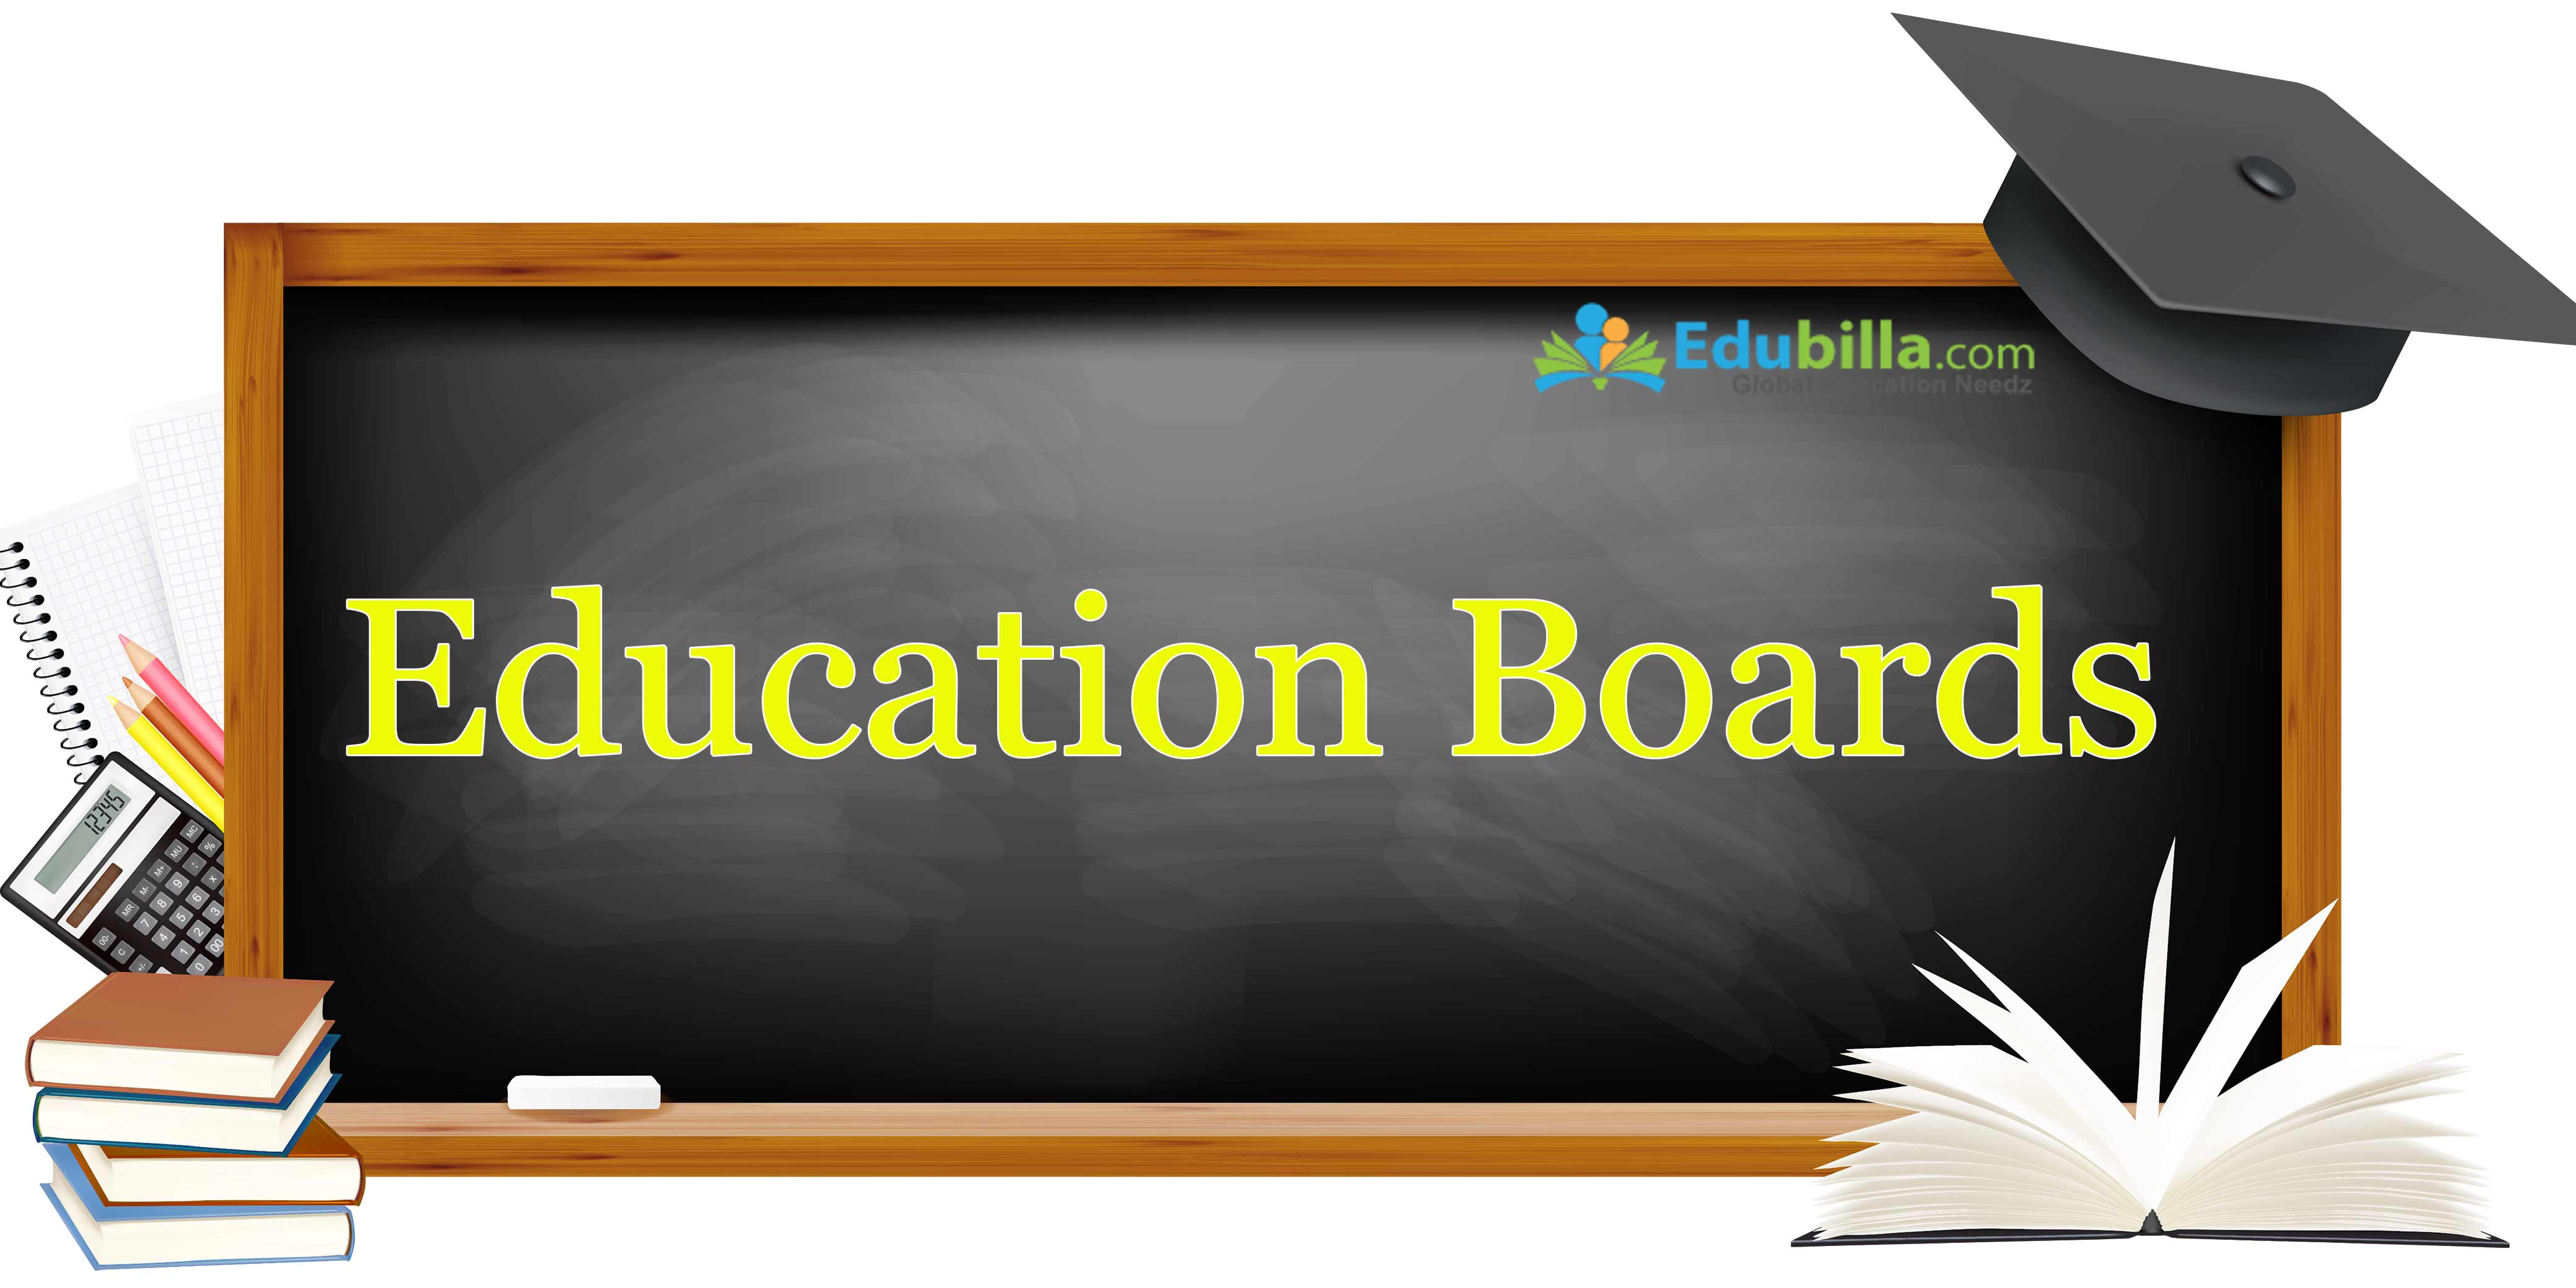 Get the details of Education Boards